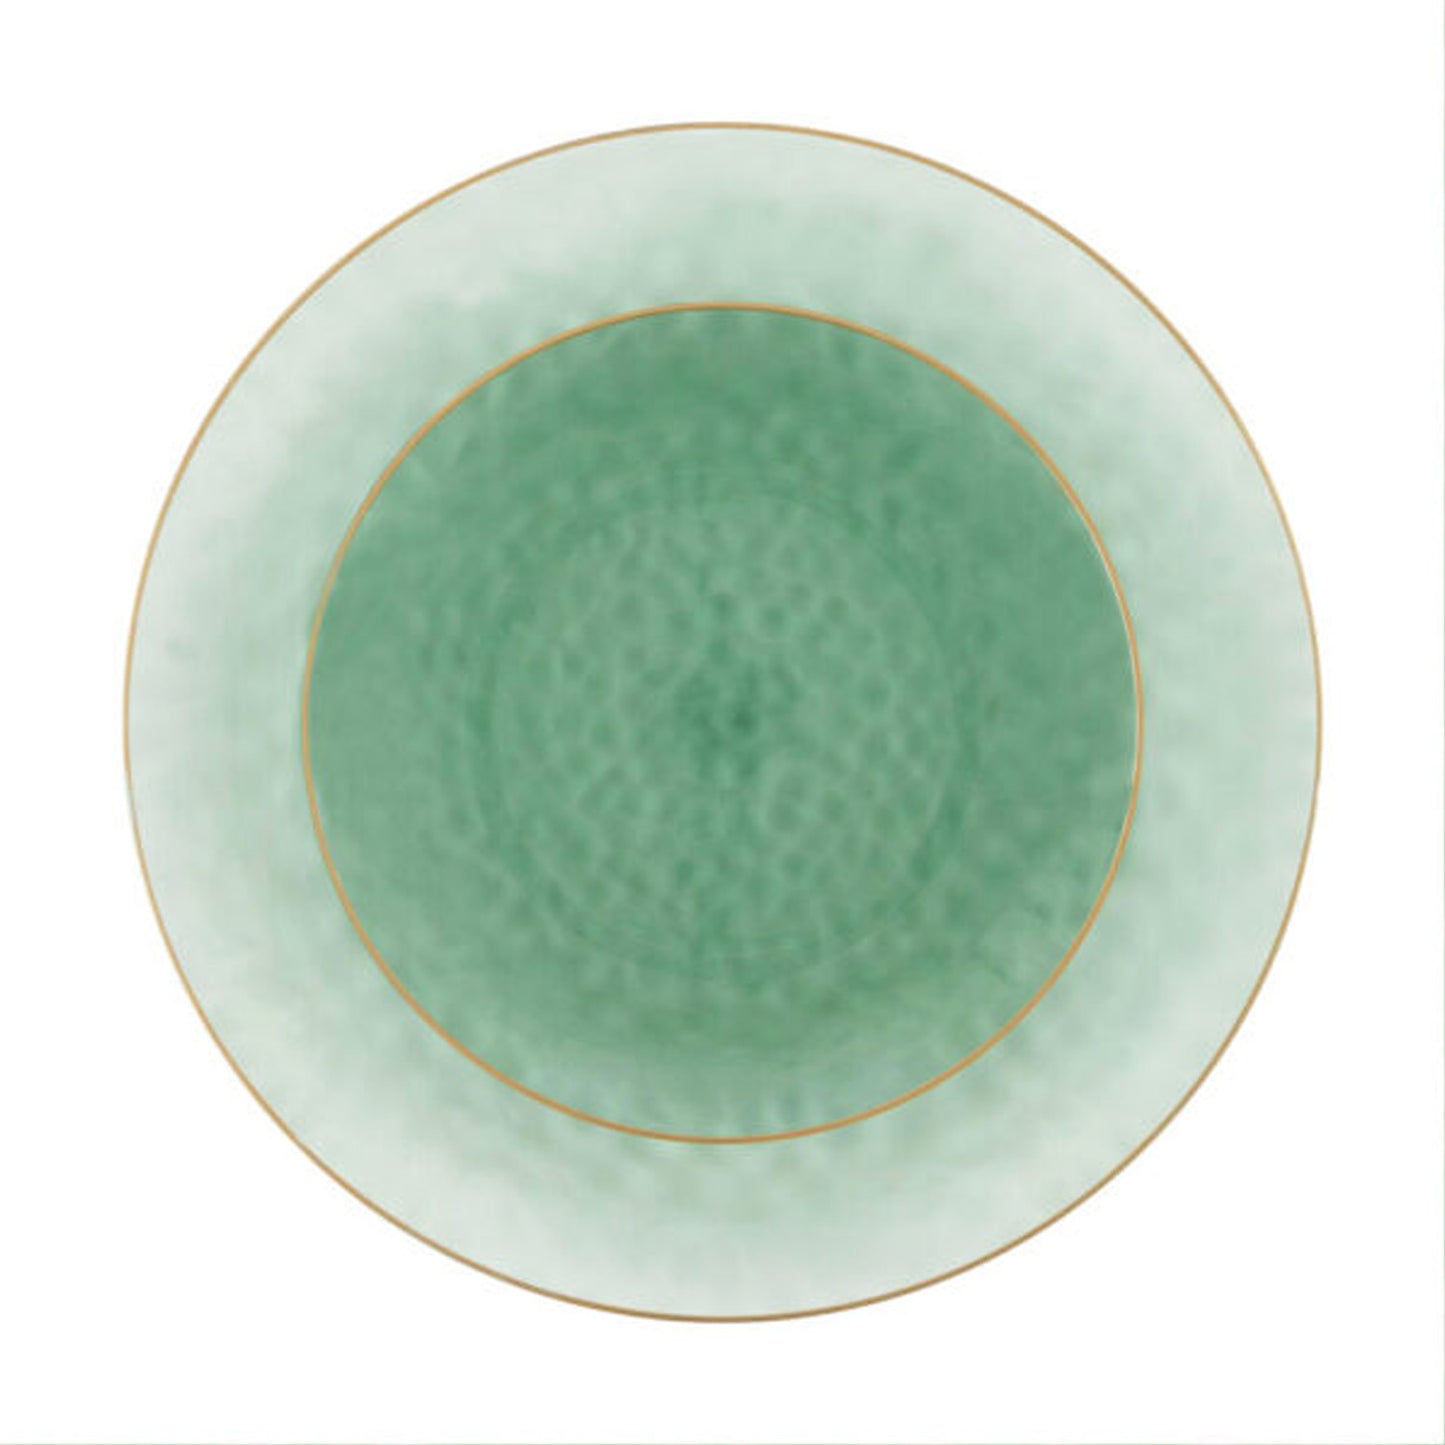 Organic Hammered Green Gold Rim 7″ Plates Tablesettings Blue Sky   